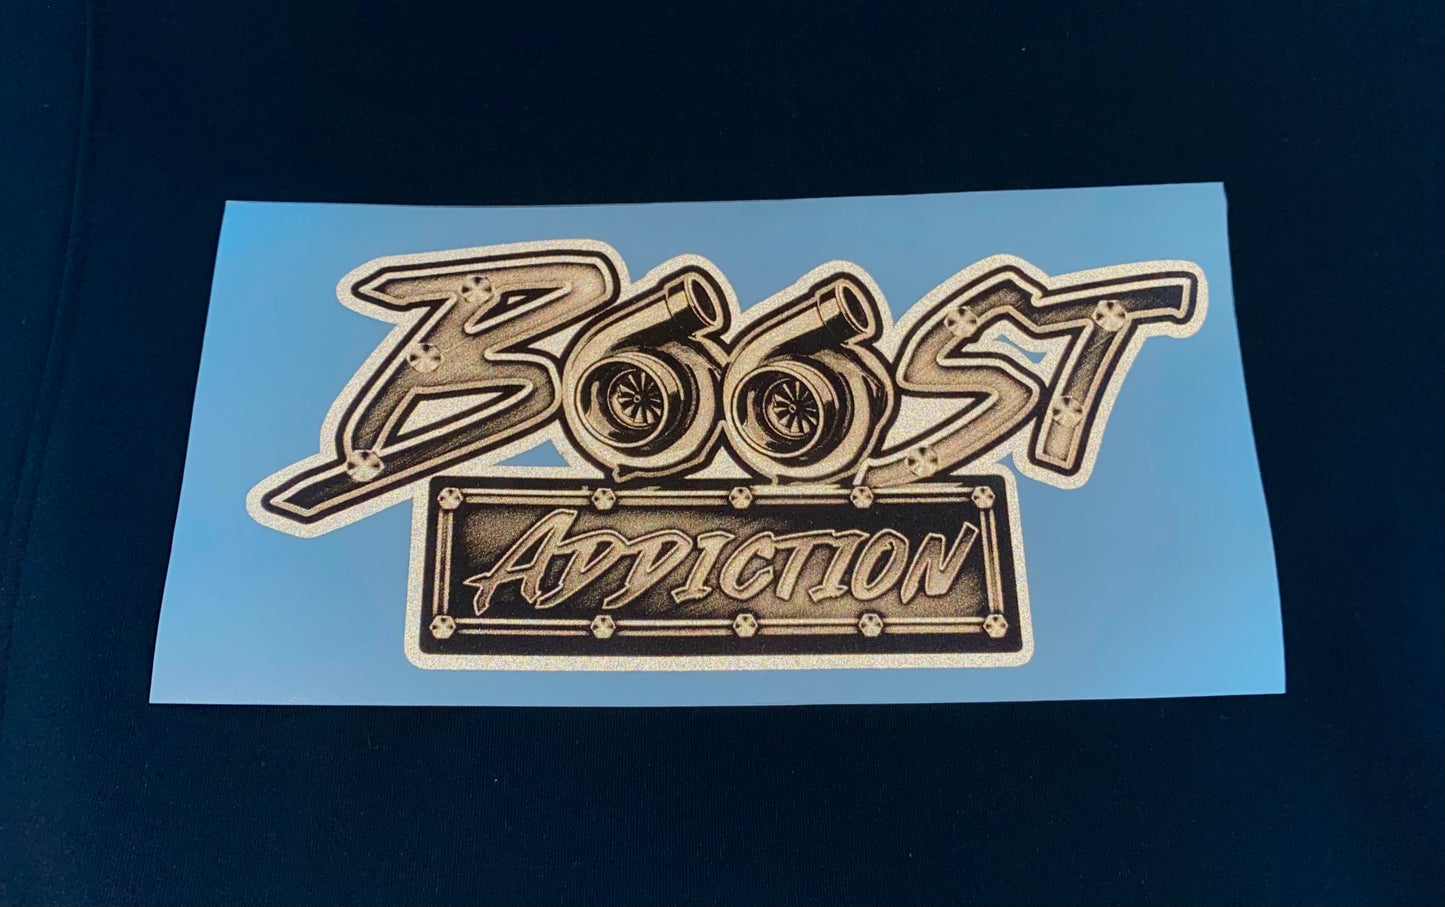 NEW!! BOOST ADDICTION STICKERS